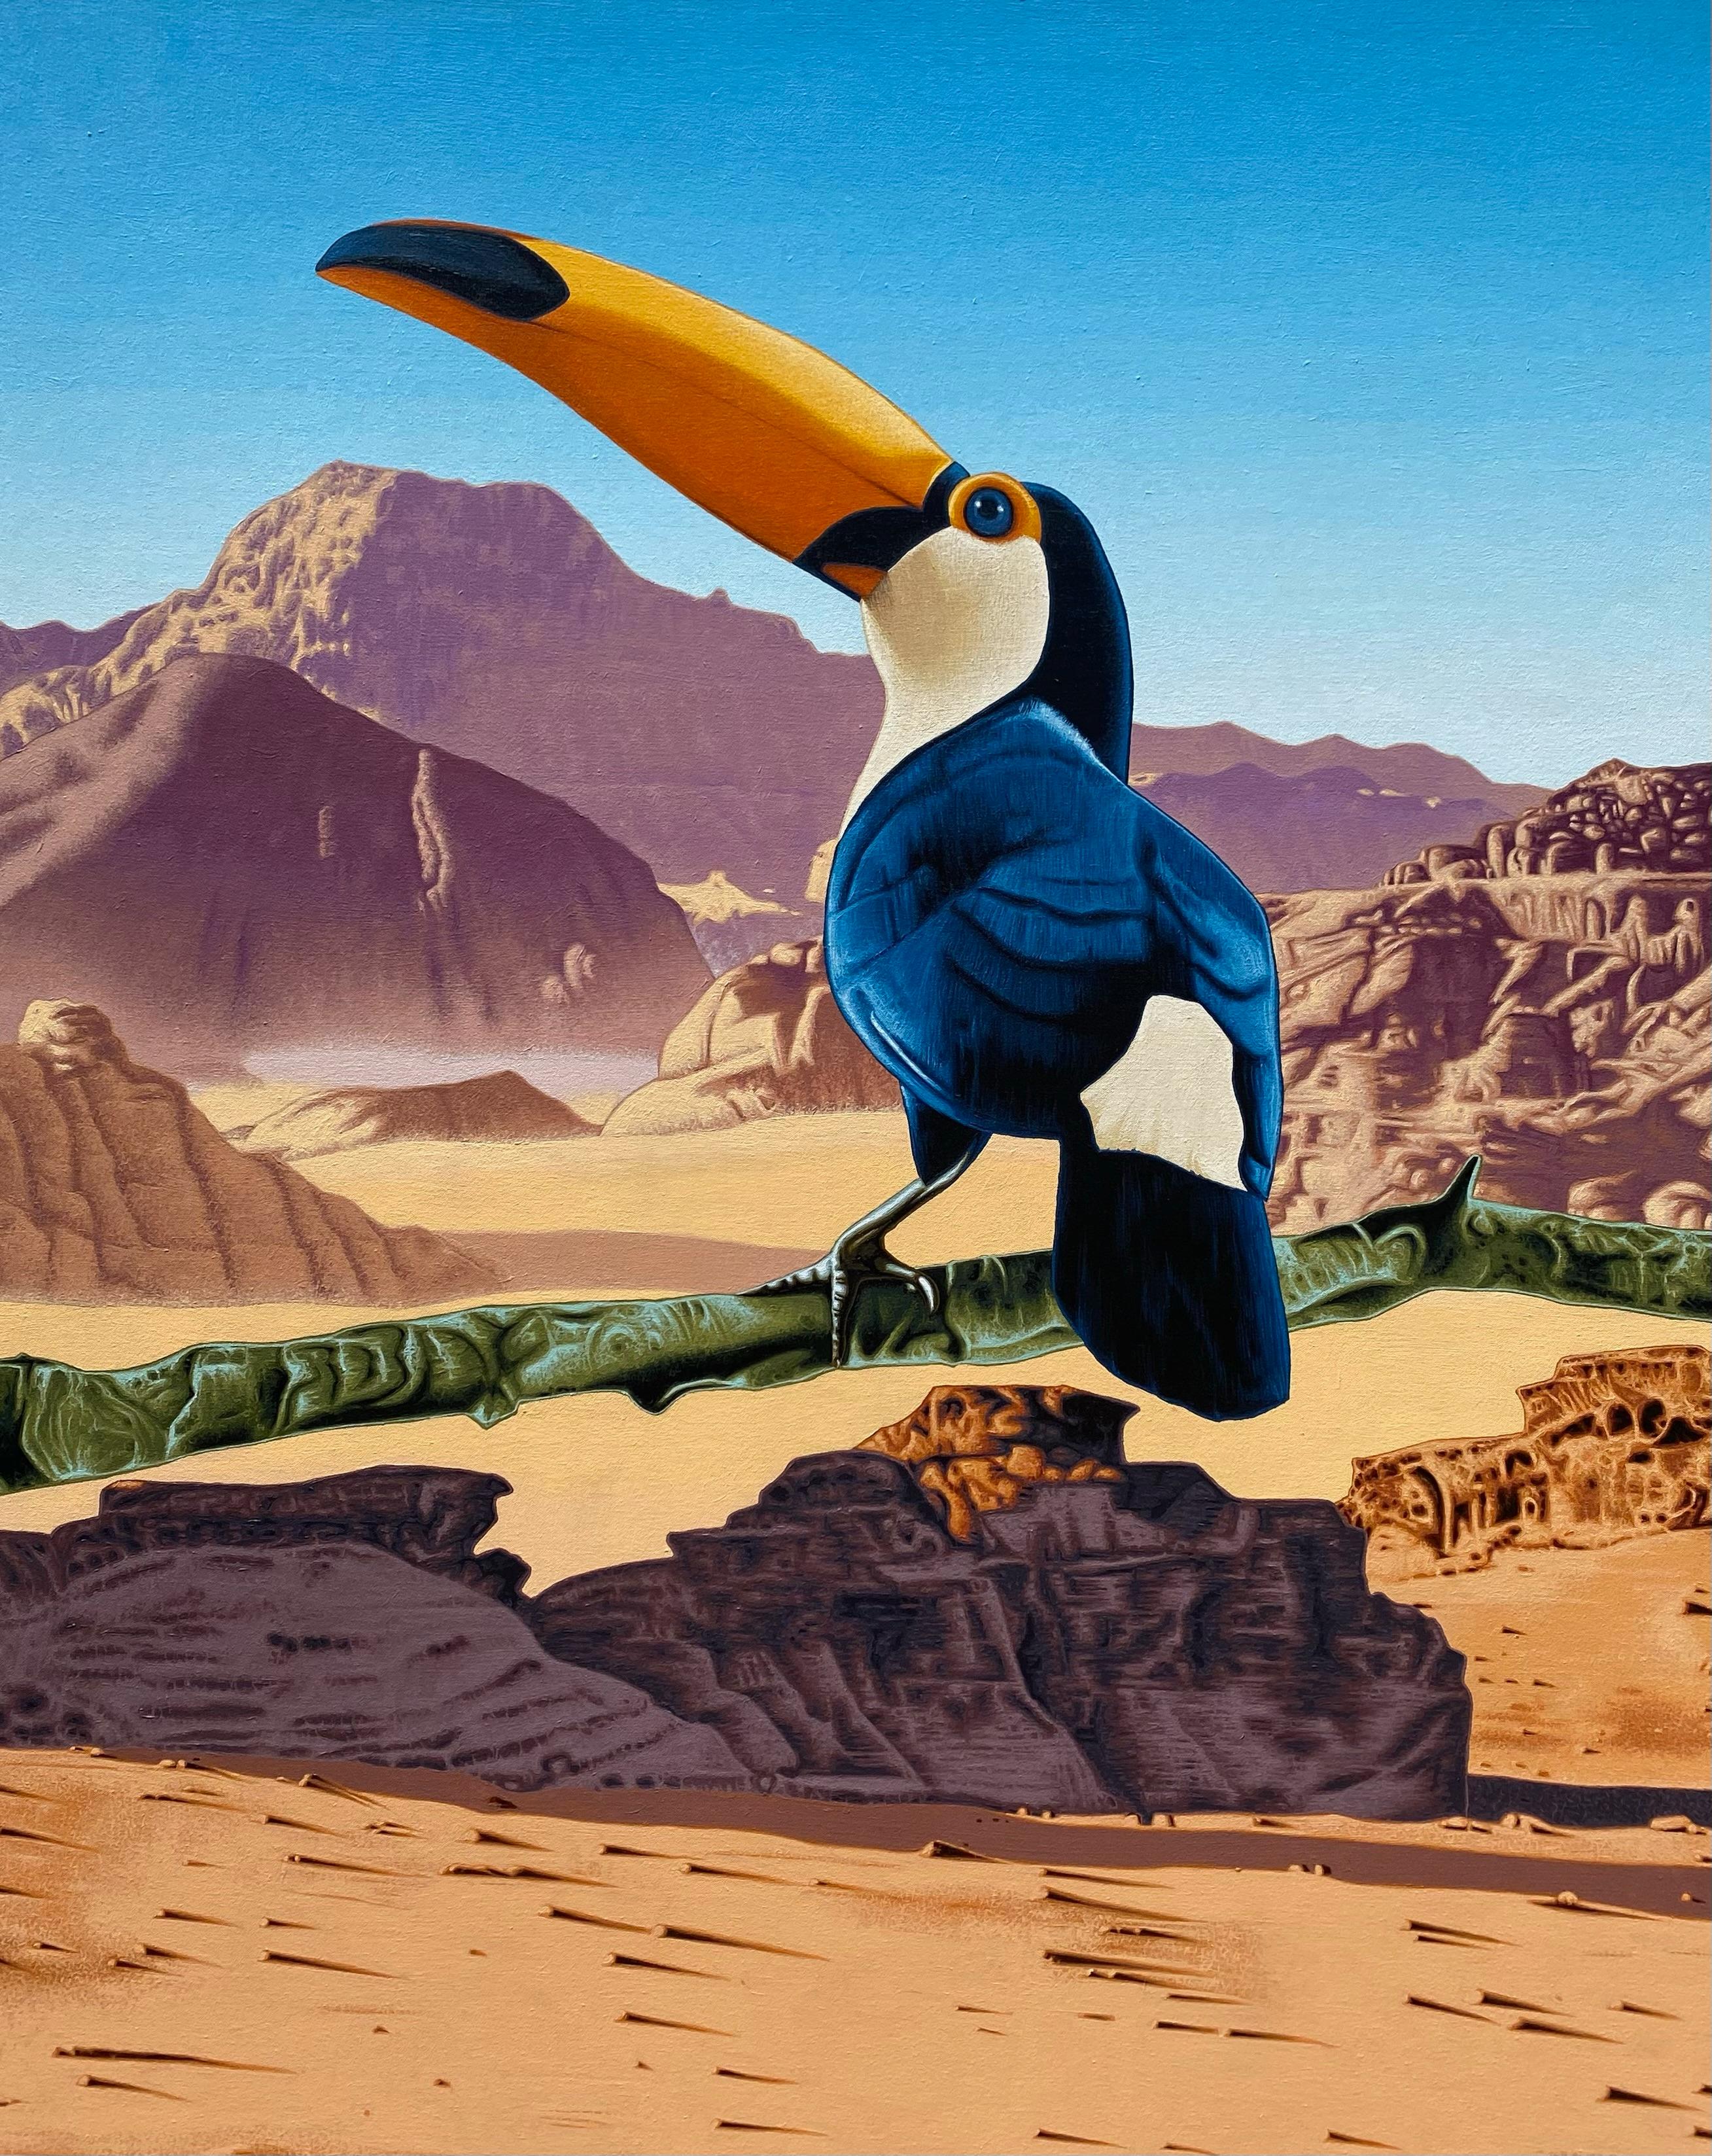 Stephen Hall Landscape Painting - Toucan in desert: “No Mirage” 